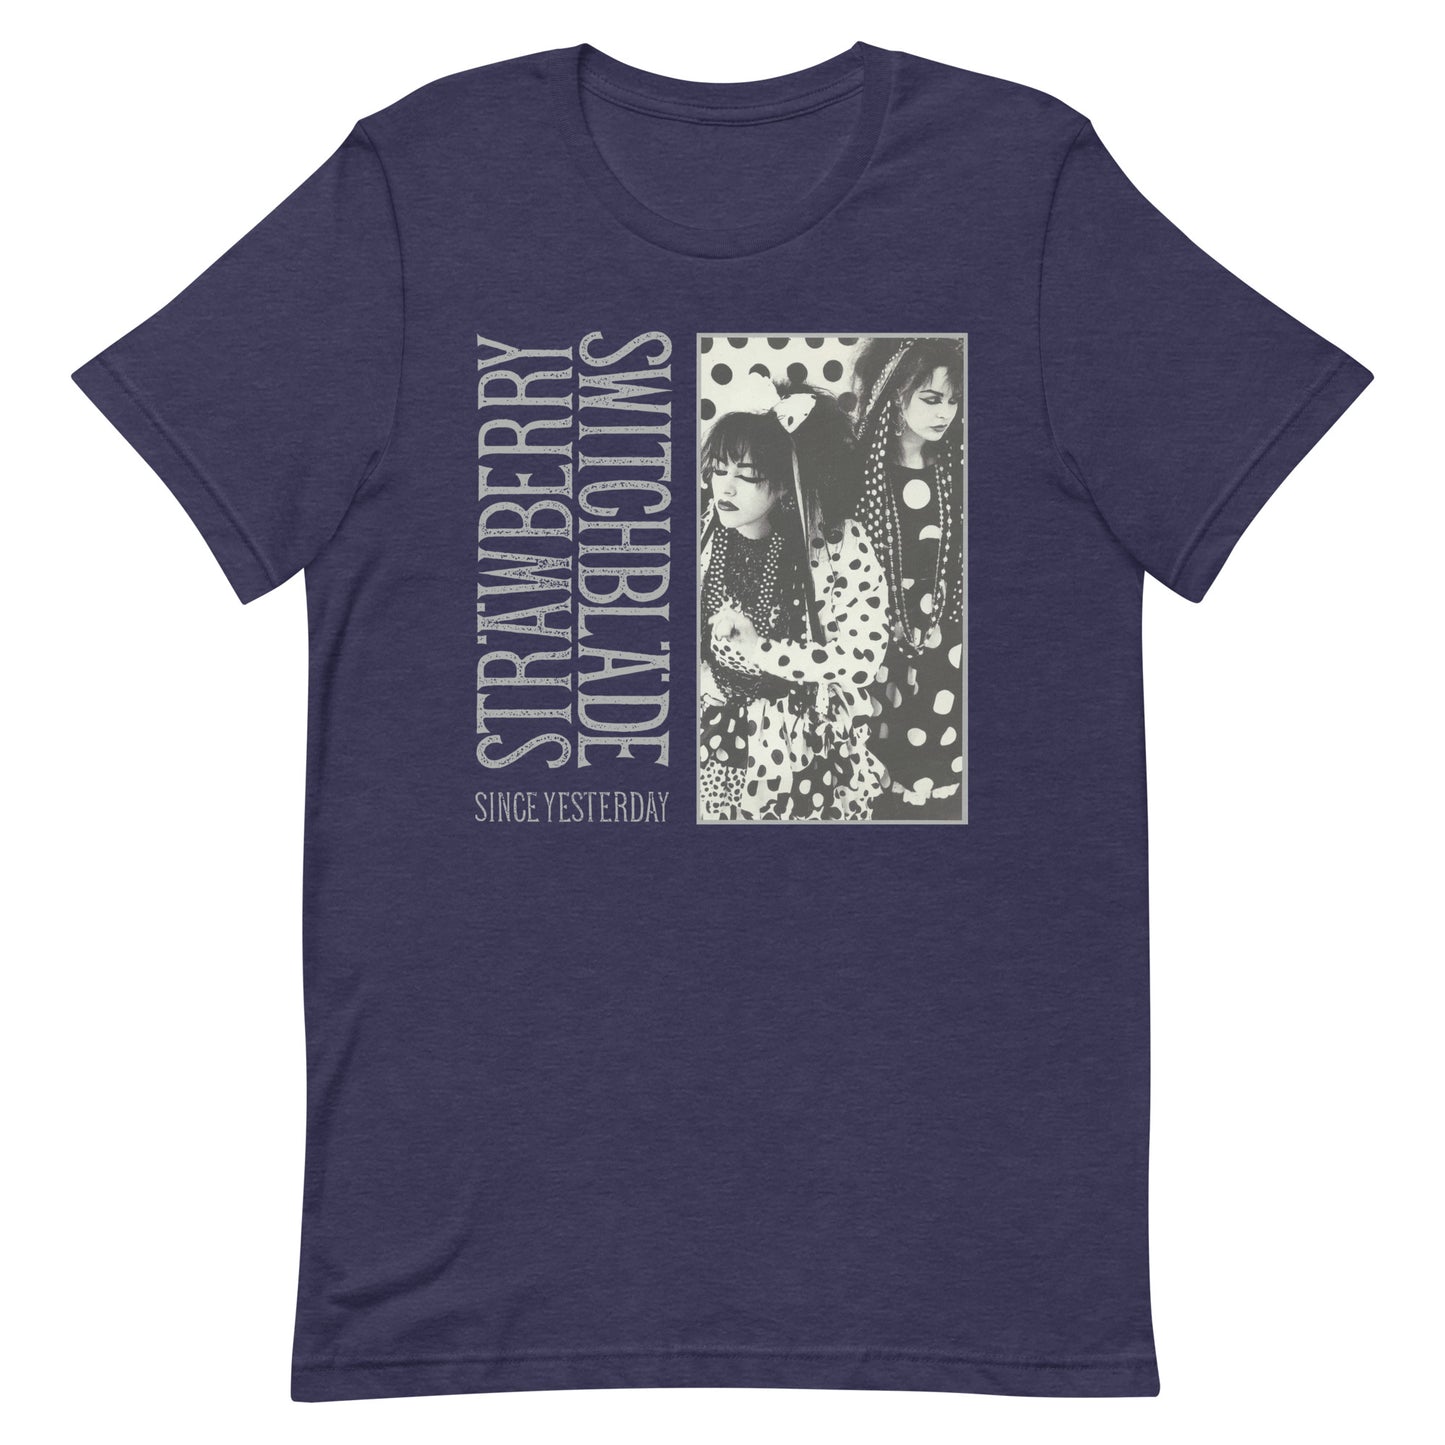 Strawberry Switchblade - Since Yesterday T-Shirt